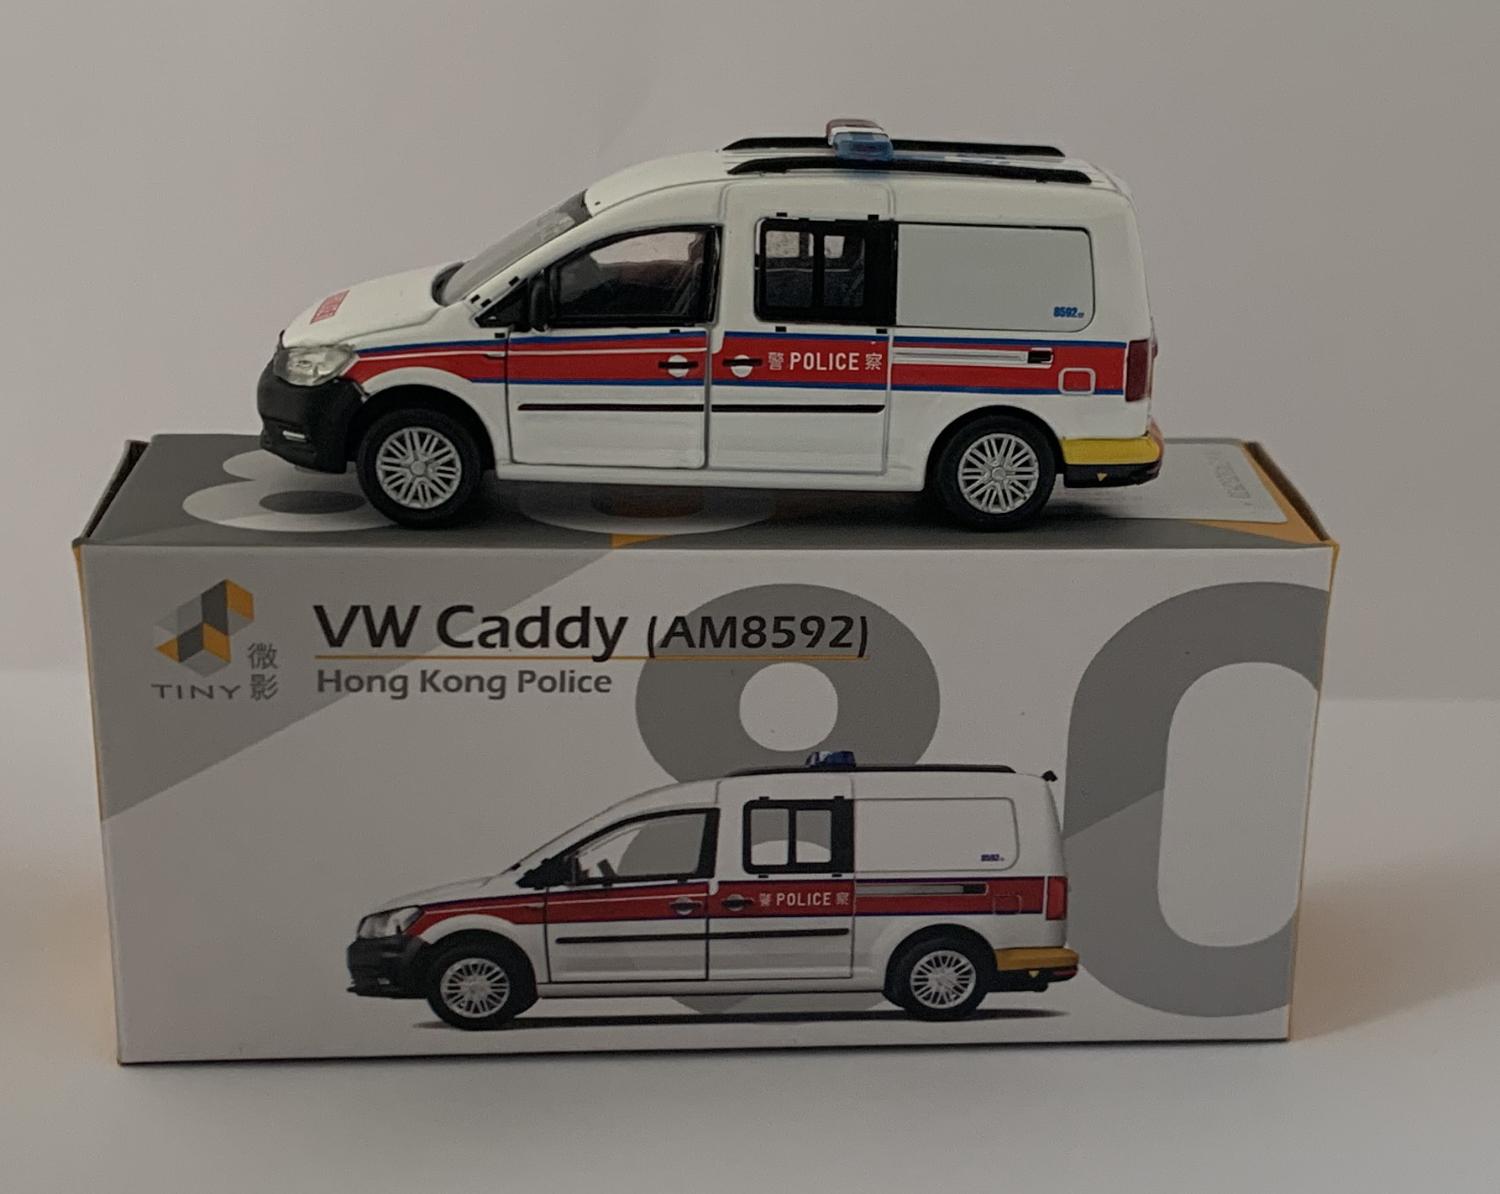 A good reproduction of the VW Caddy Hong Kong Police with detail throughout, all authentically recreated. The model is presented in a box, the car is approx. 7.5 cm long and the box is 10 cm long